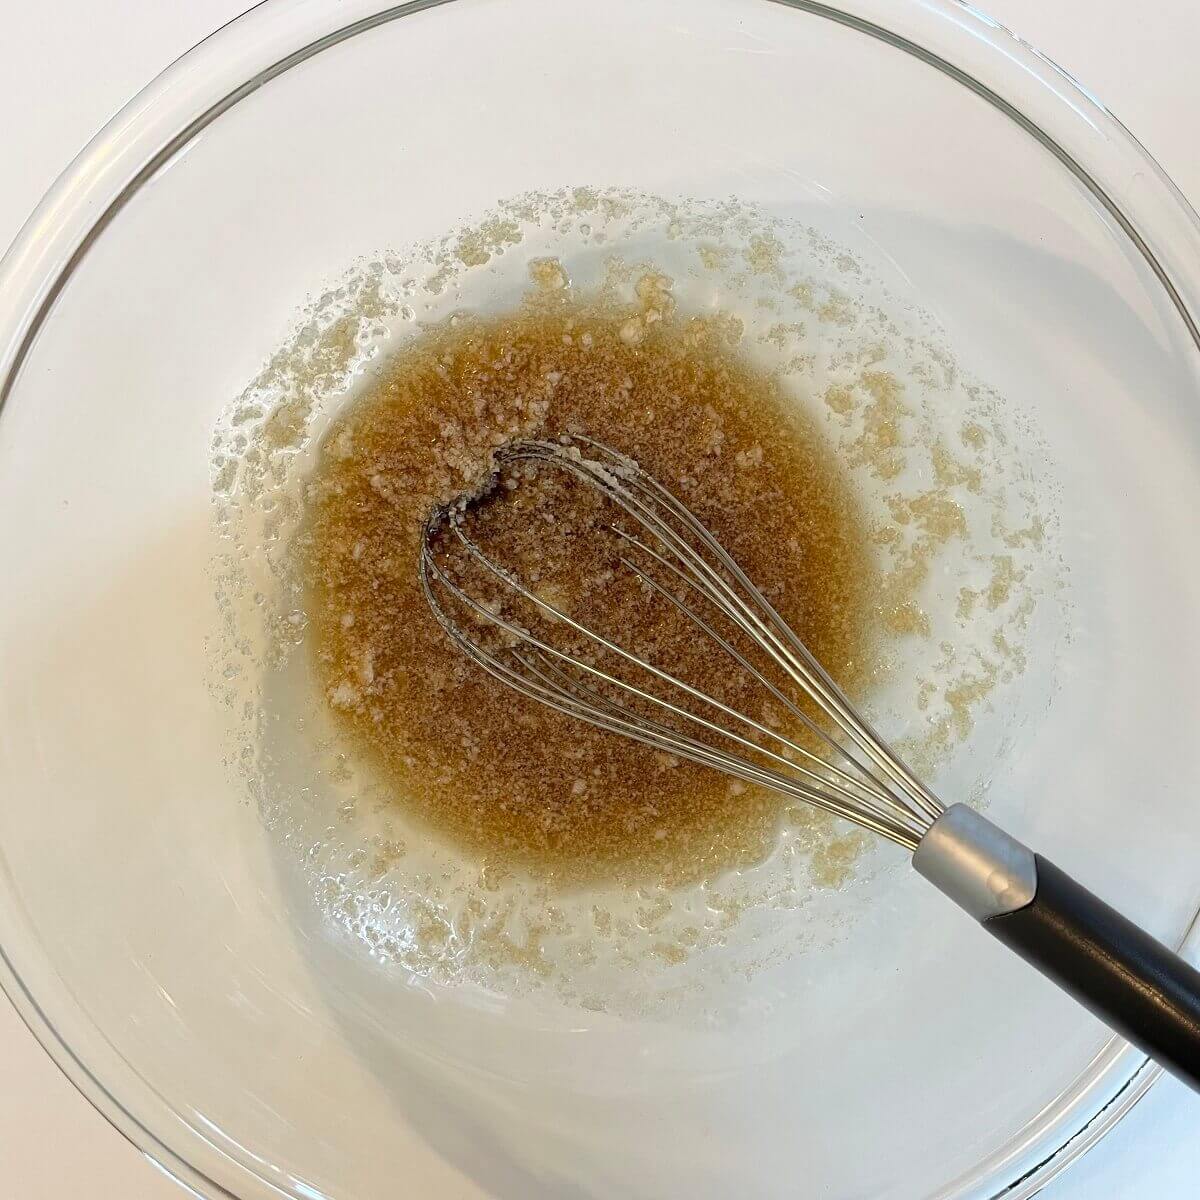 Coconut oil, maple syrup, vanilla extract, and salt mixed together in a glass bowl with a whisk.